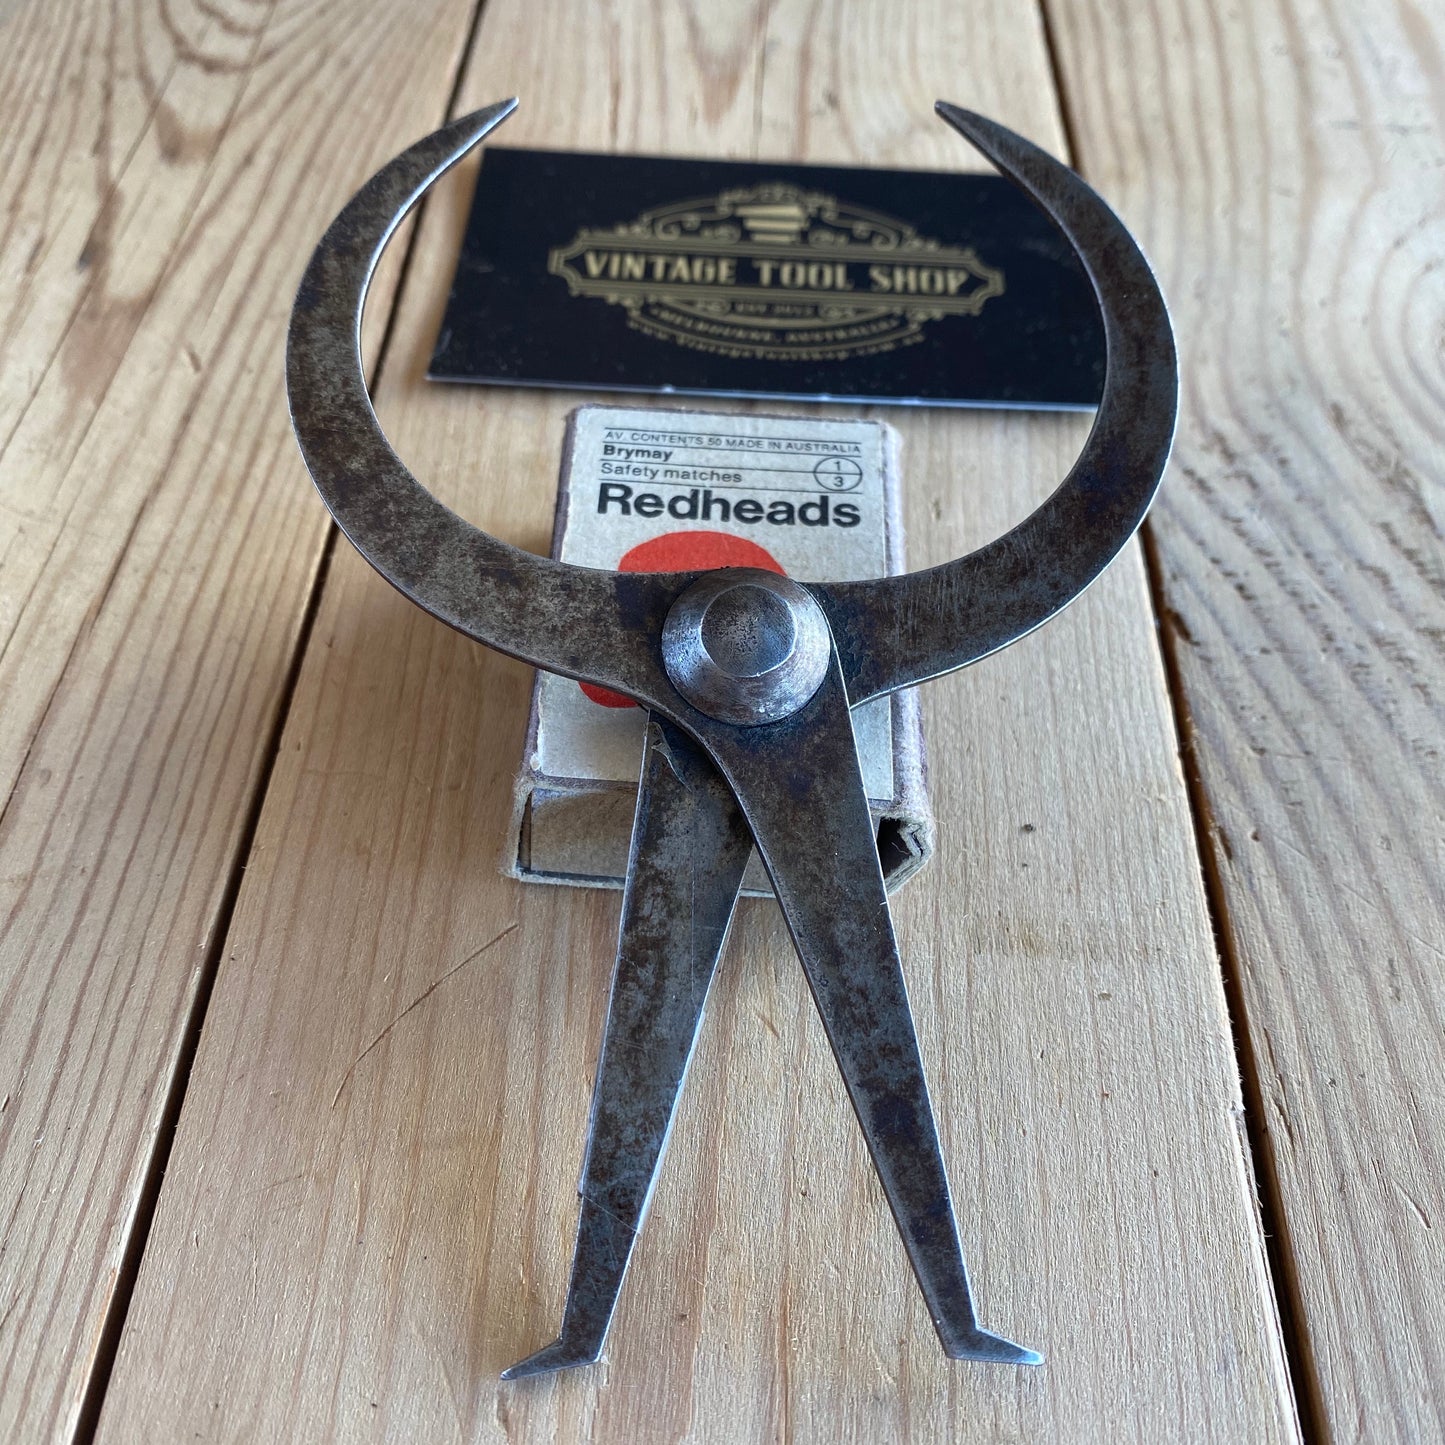 SOLD Vintage outside to inside CALIPERS measuring tool T4406